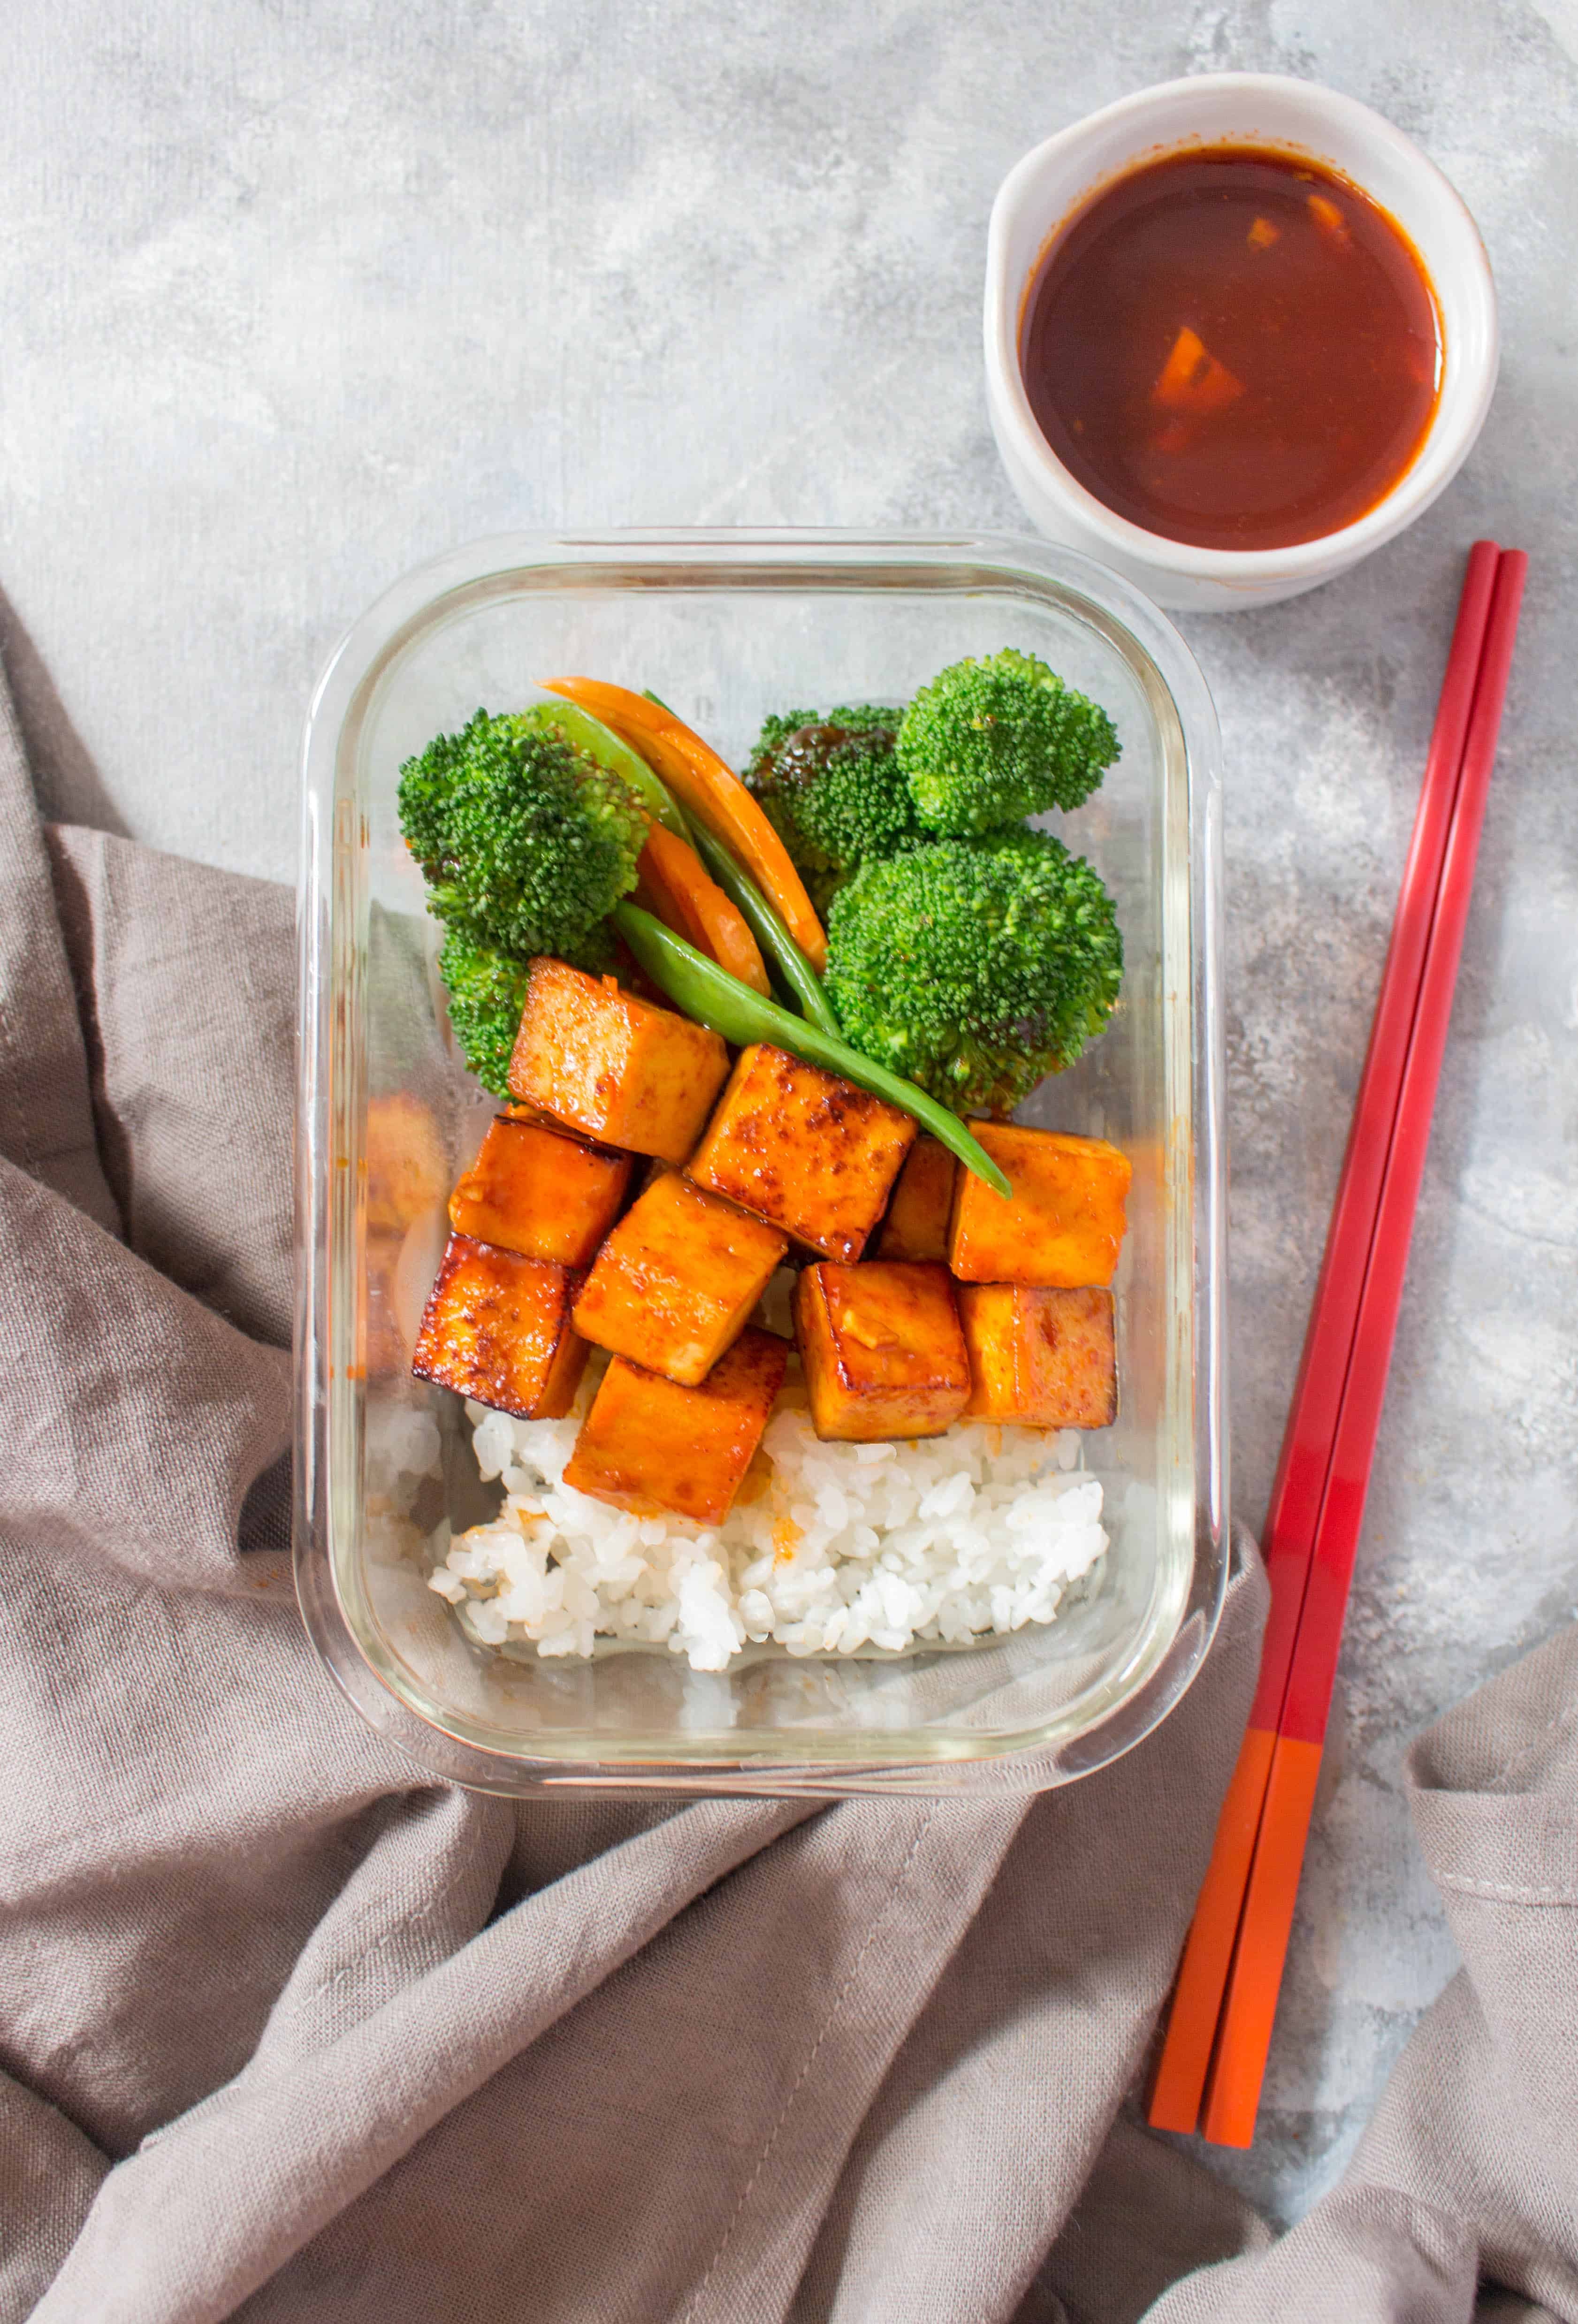 This Korean Spicy Tofu Meal Prep is going knock your socks off. A perfect balance of heat and sweet, you won't even notice this meal prep is tofu!